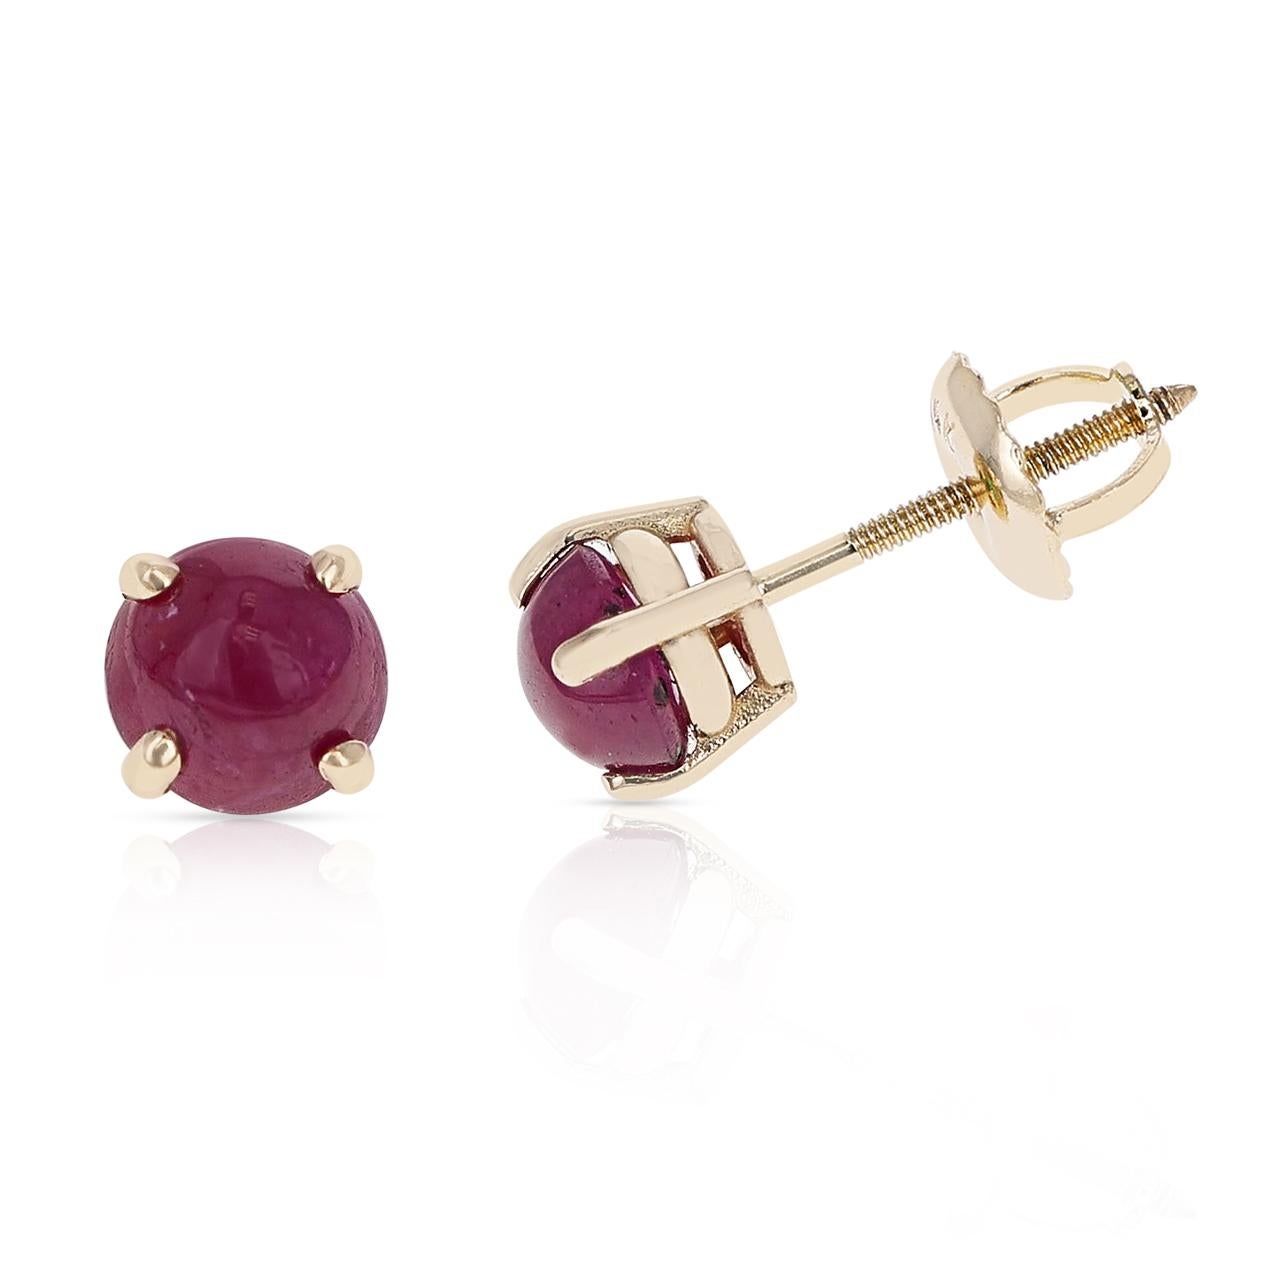 Round Cut Ruby Round Cabochon Stud Earrings Made in 14 Karat Yellow Gold